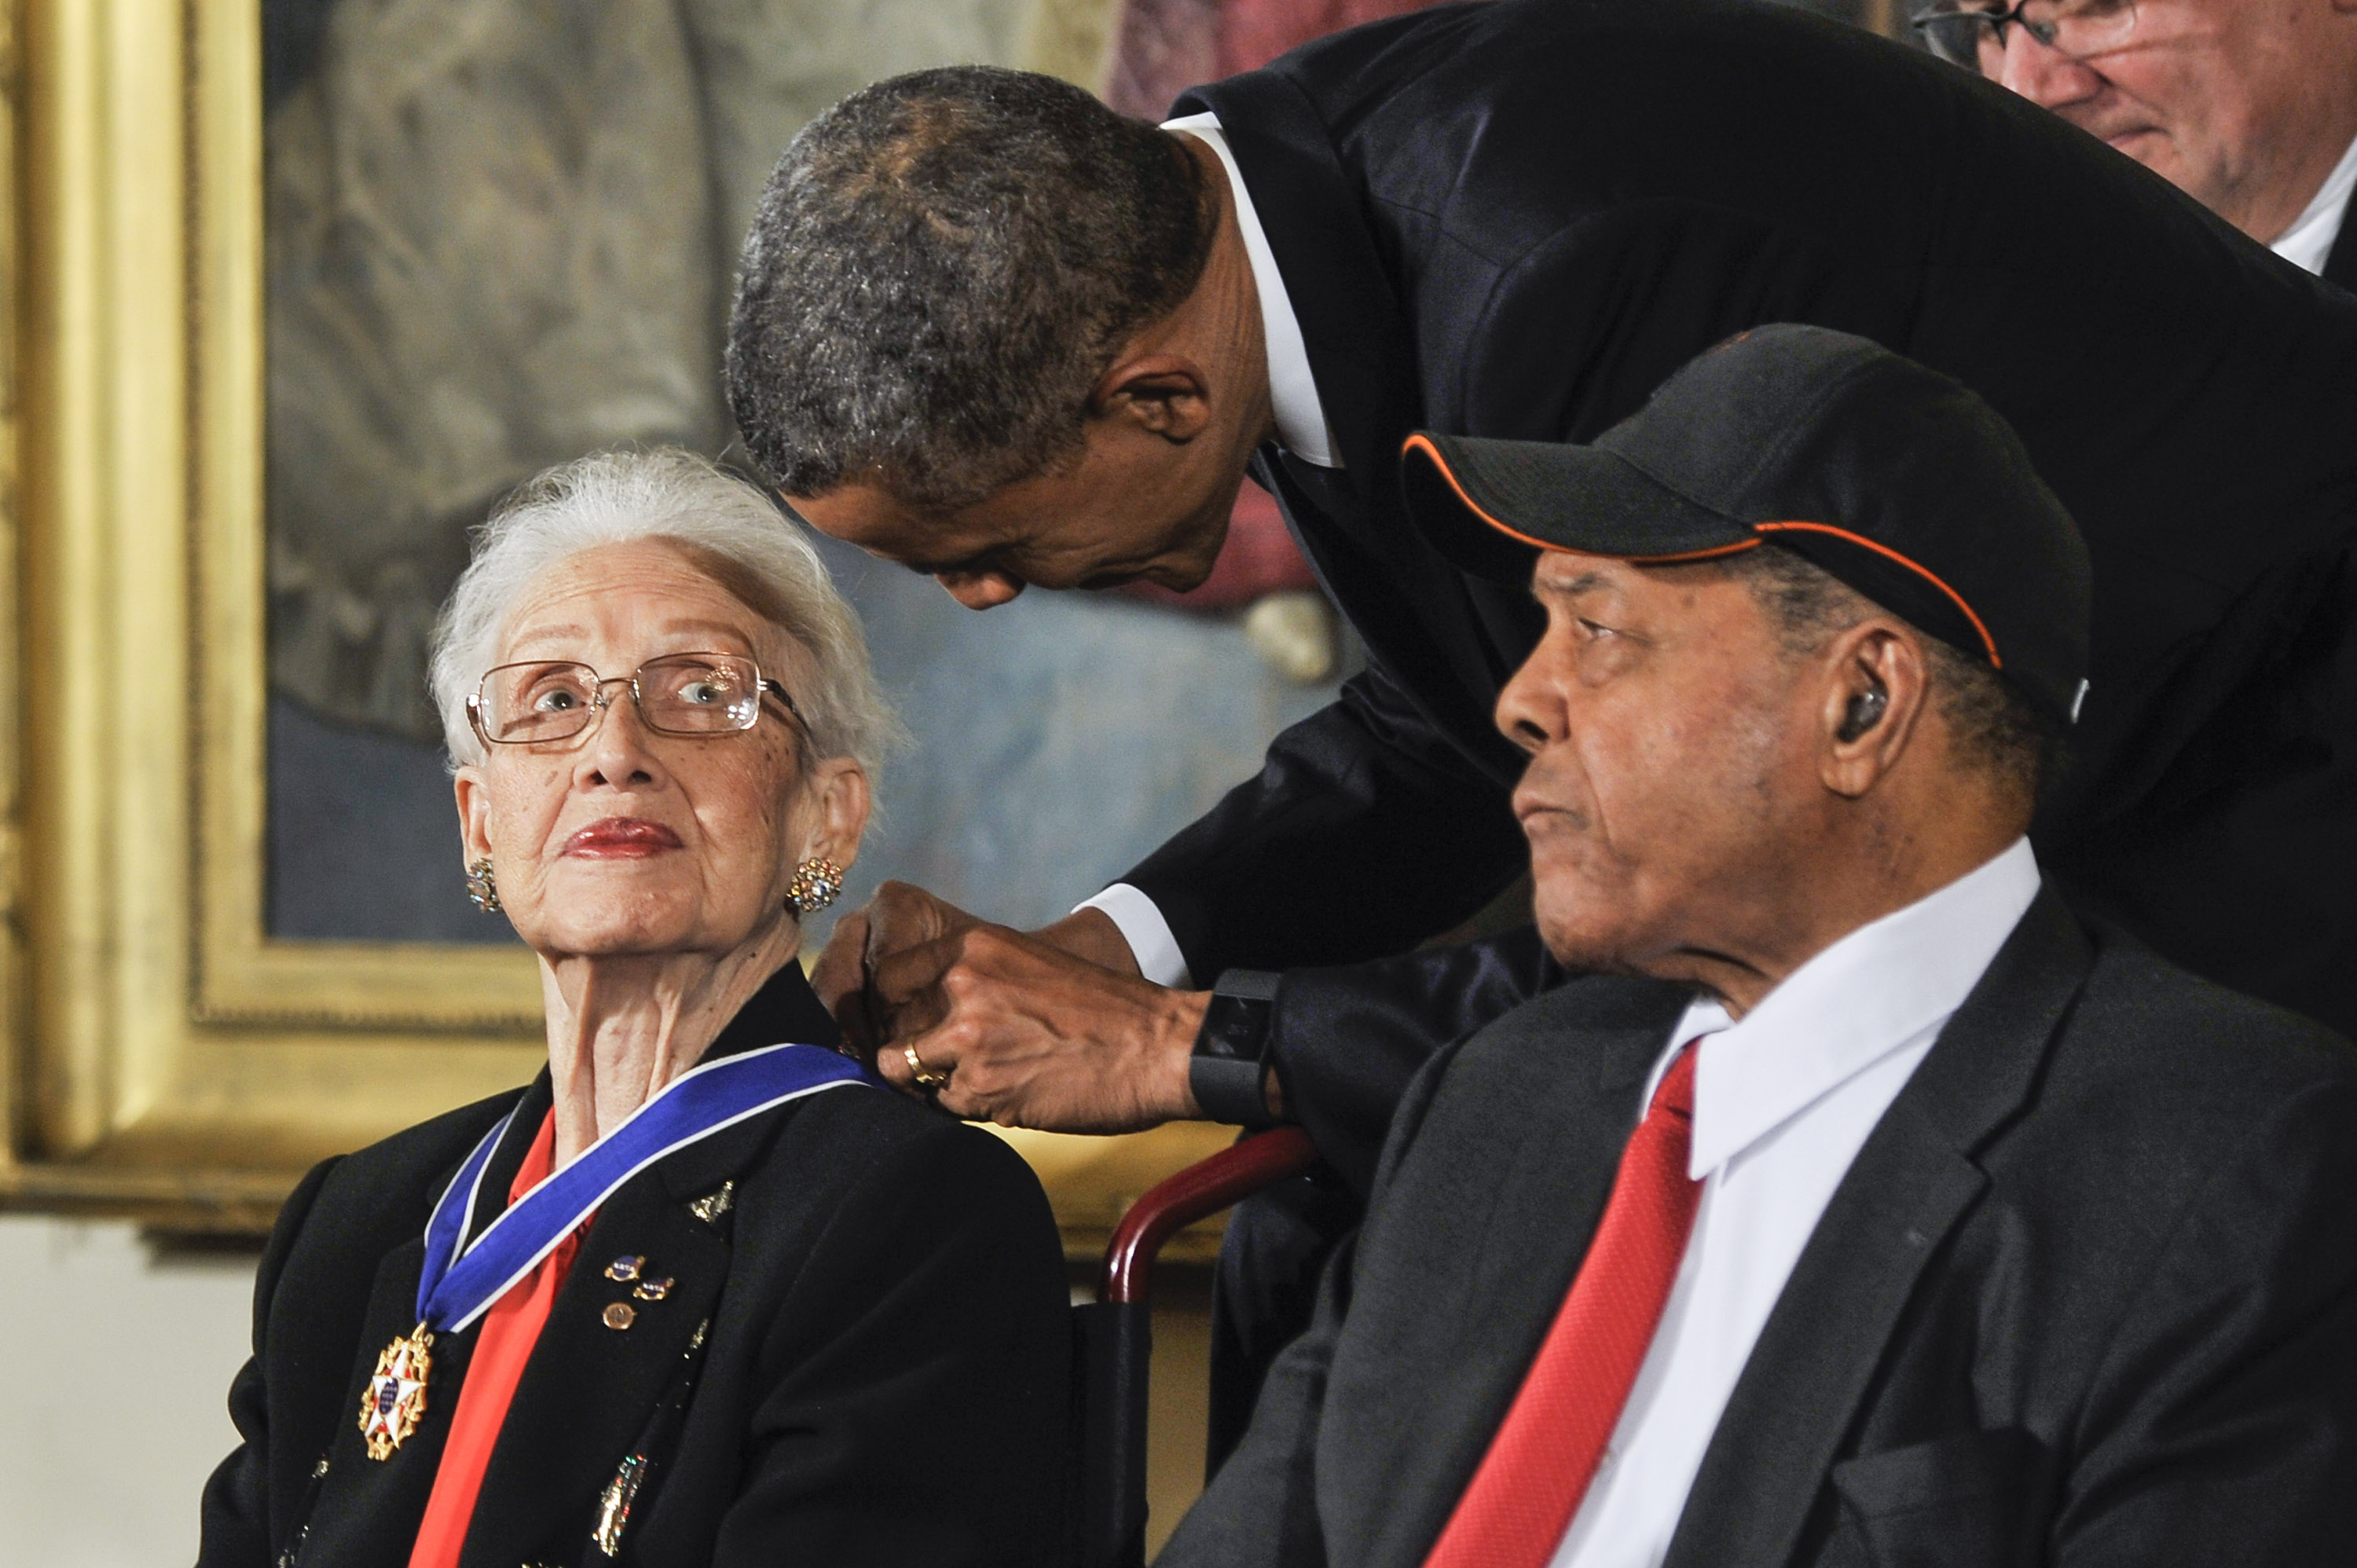 President Barack Obama presents Katherine G. Johnson with the Presidential Medal of Freedom during the 2015 Presidential Medal Of Freedom Ceremony at the White House on November 24, 2015 in Washington, DC. (Kris Connor&mdash;WireImage)